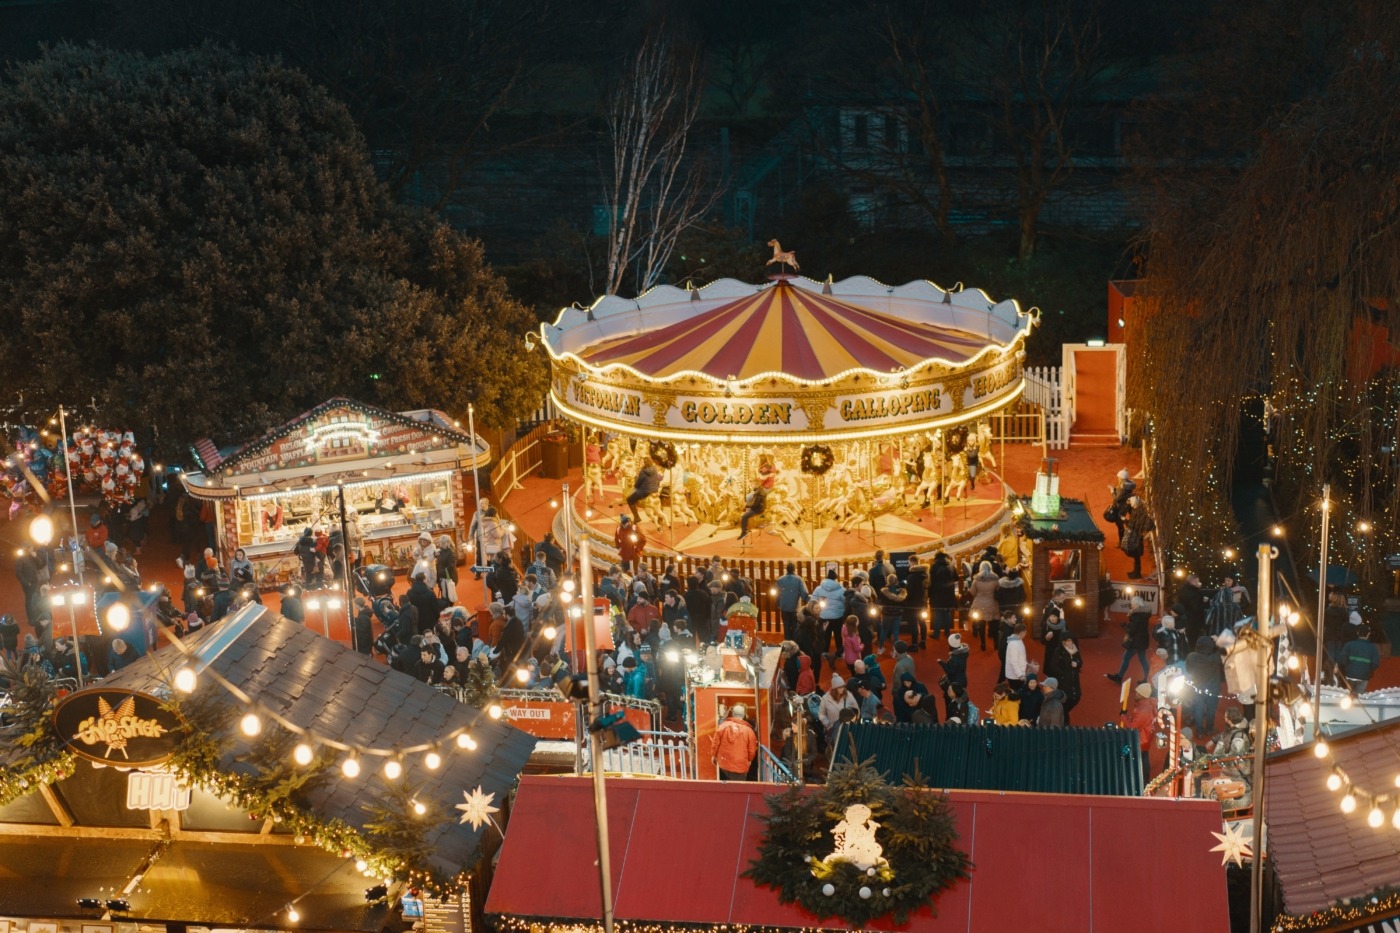 More Christmas markets close to home or further afield